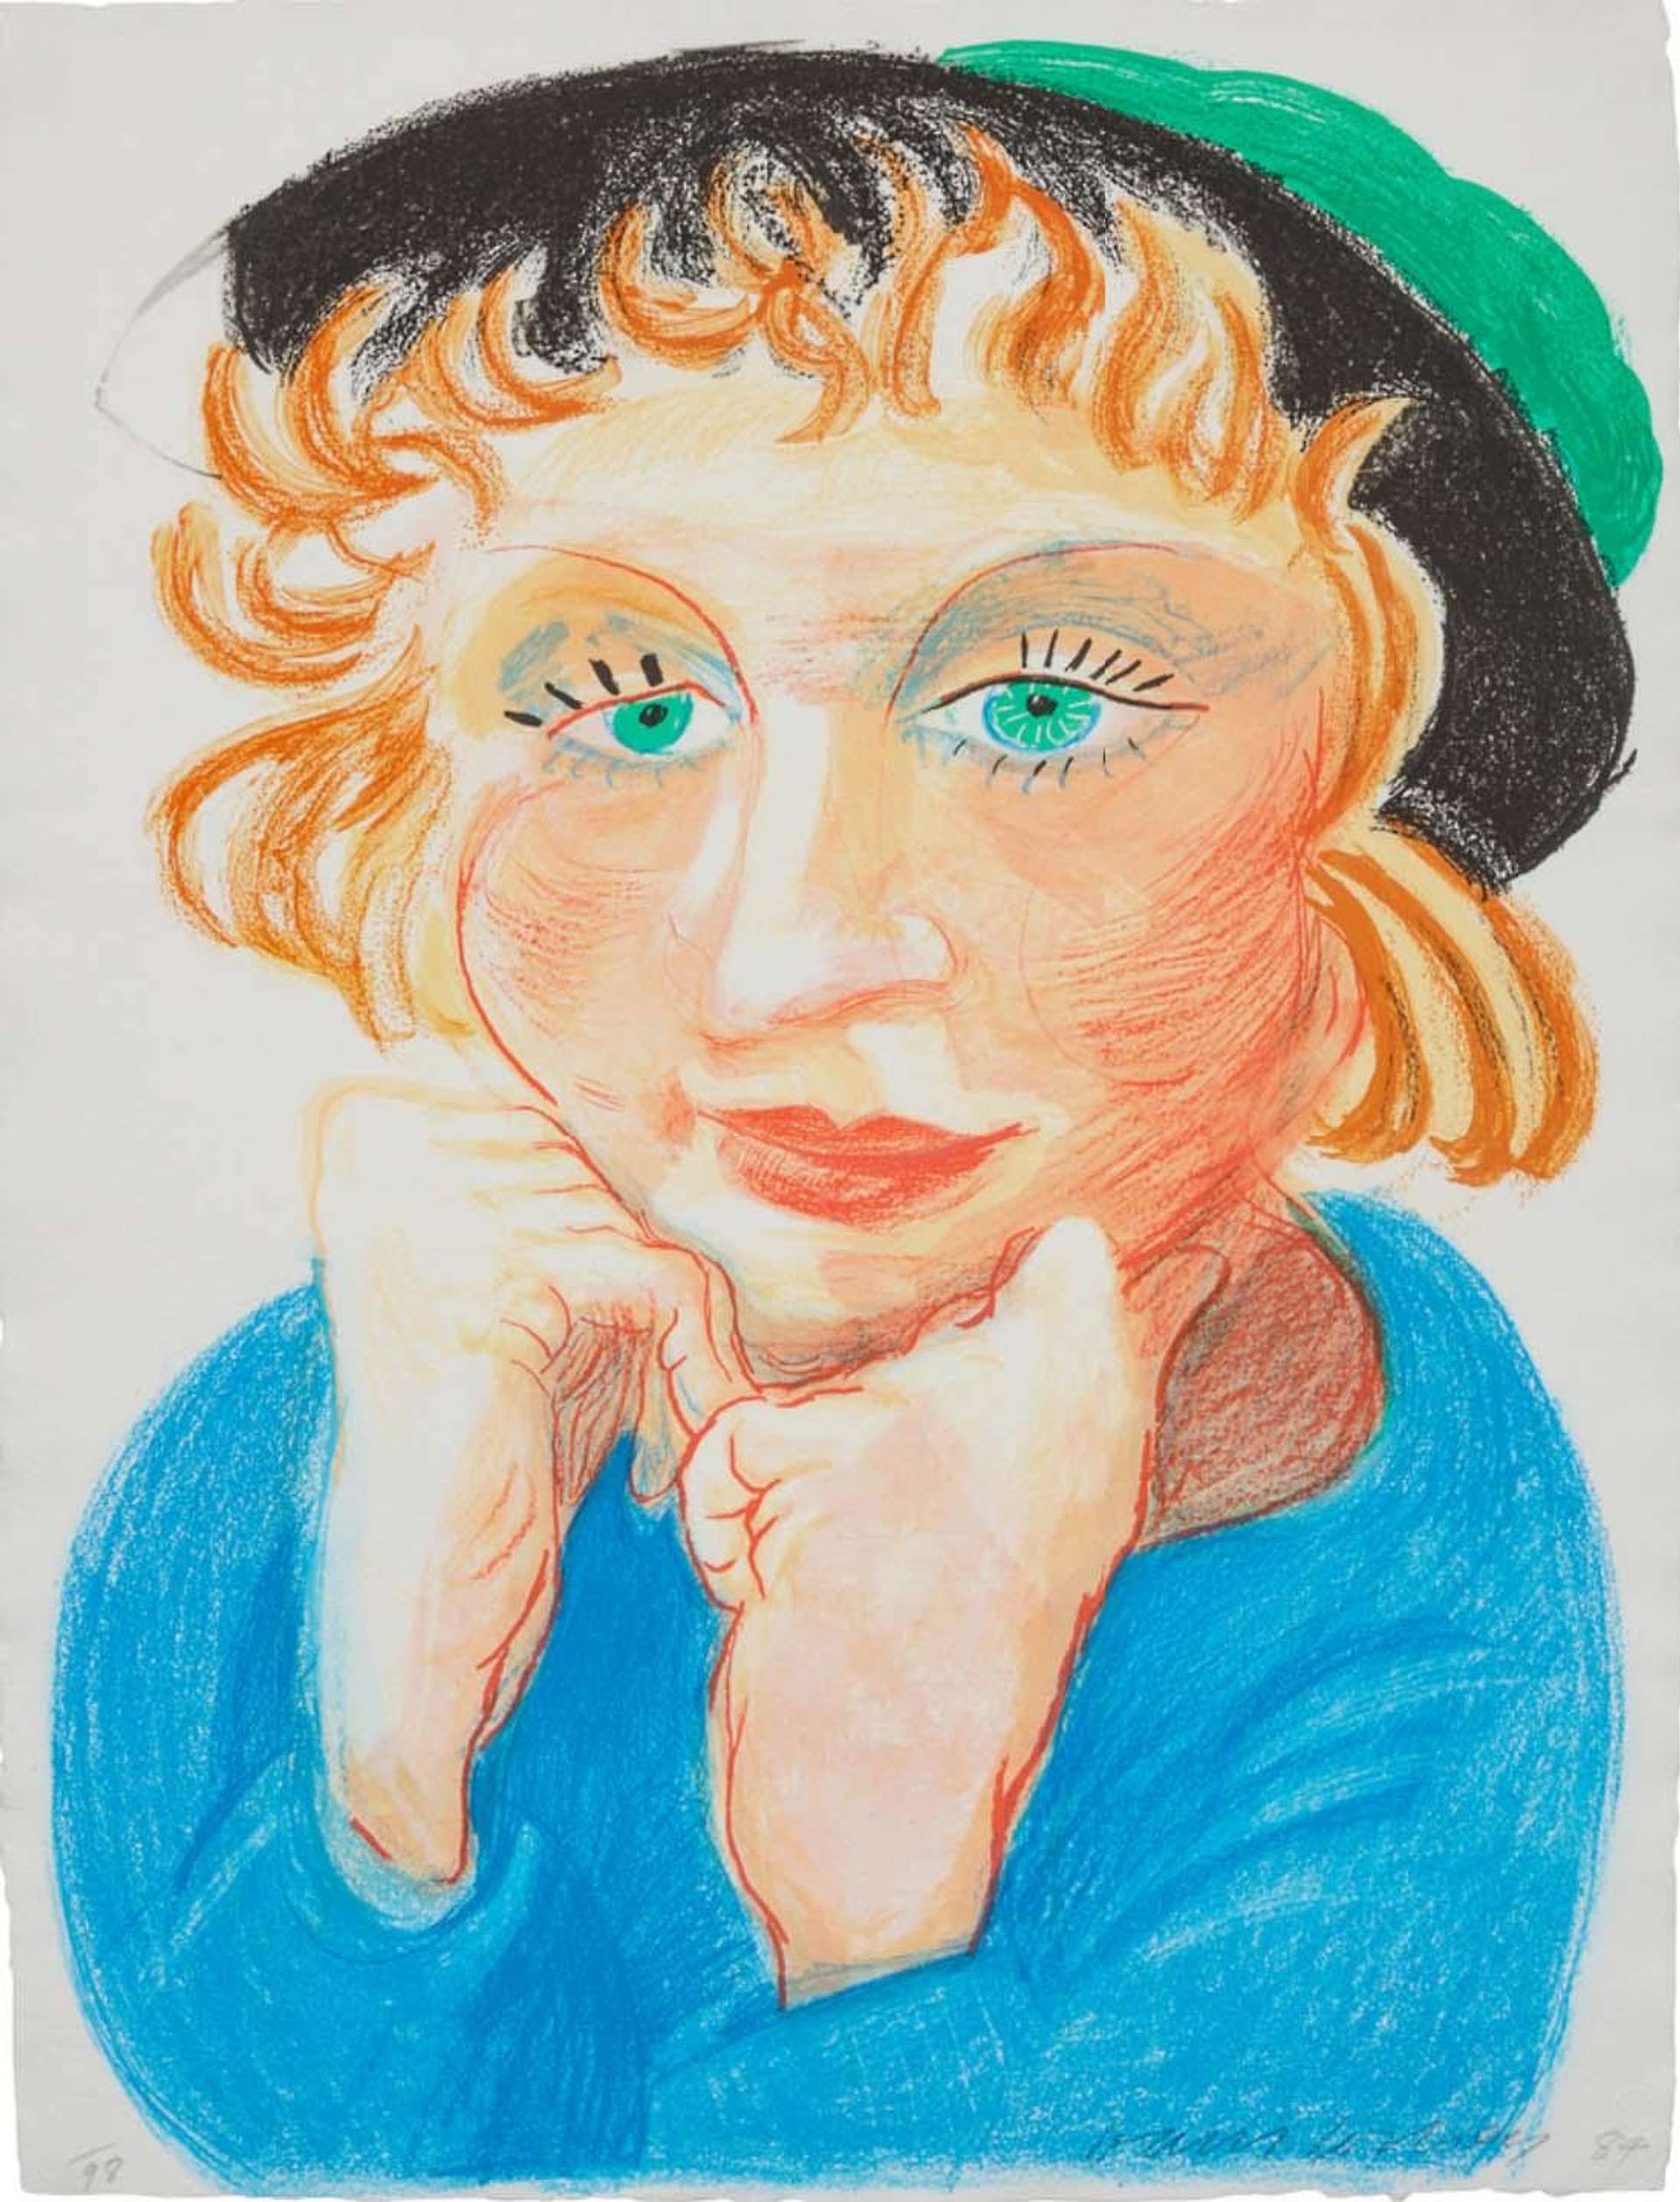 David Hockney's Celia With Green Hat. A lithographic print of a woman with blonde hair, green eyes, a blue sweater and green hat with her chin placed between both hands.